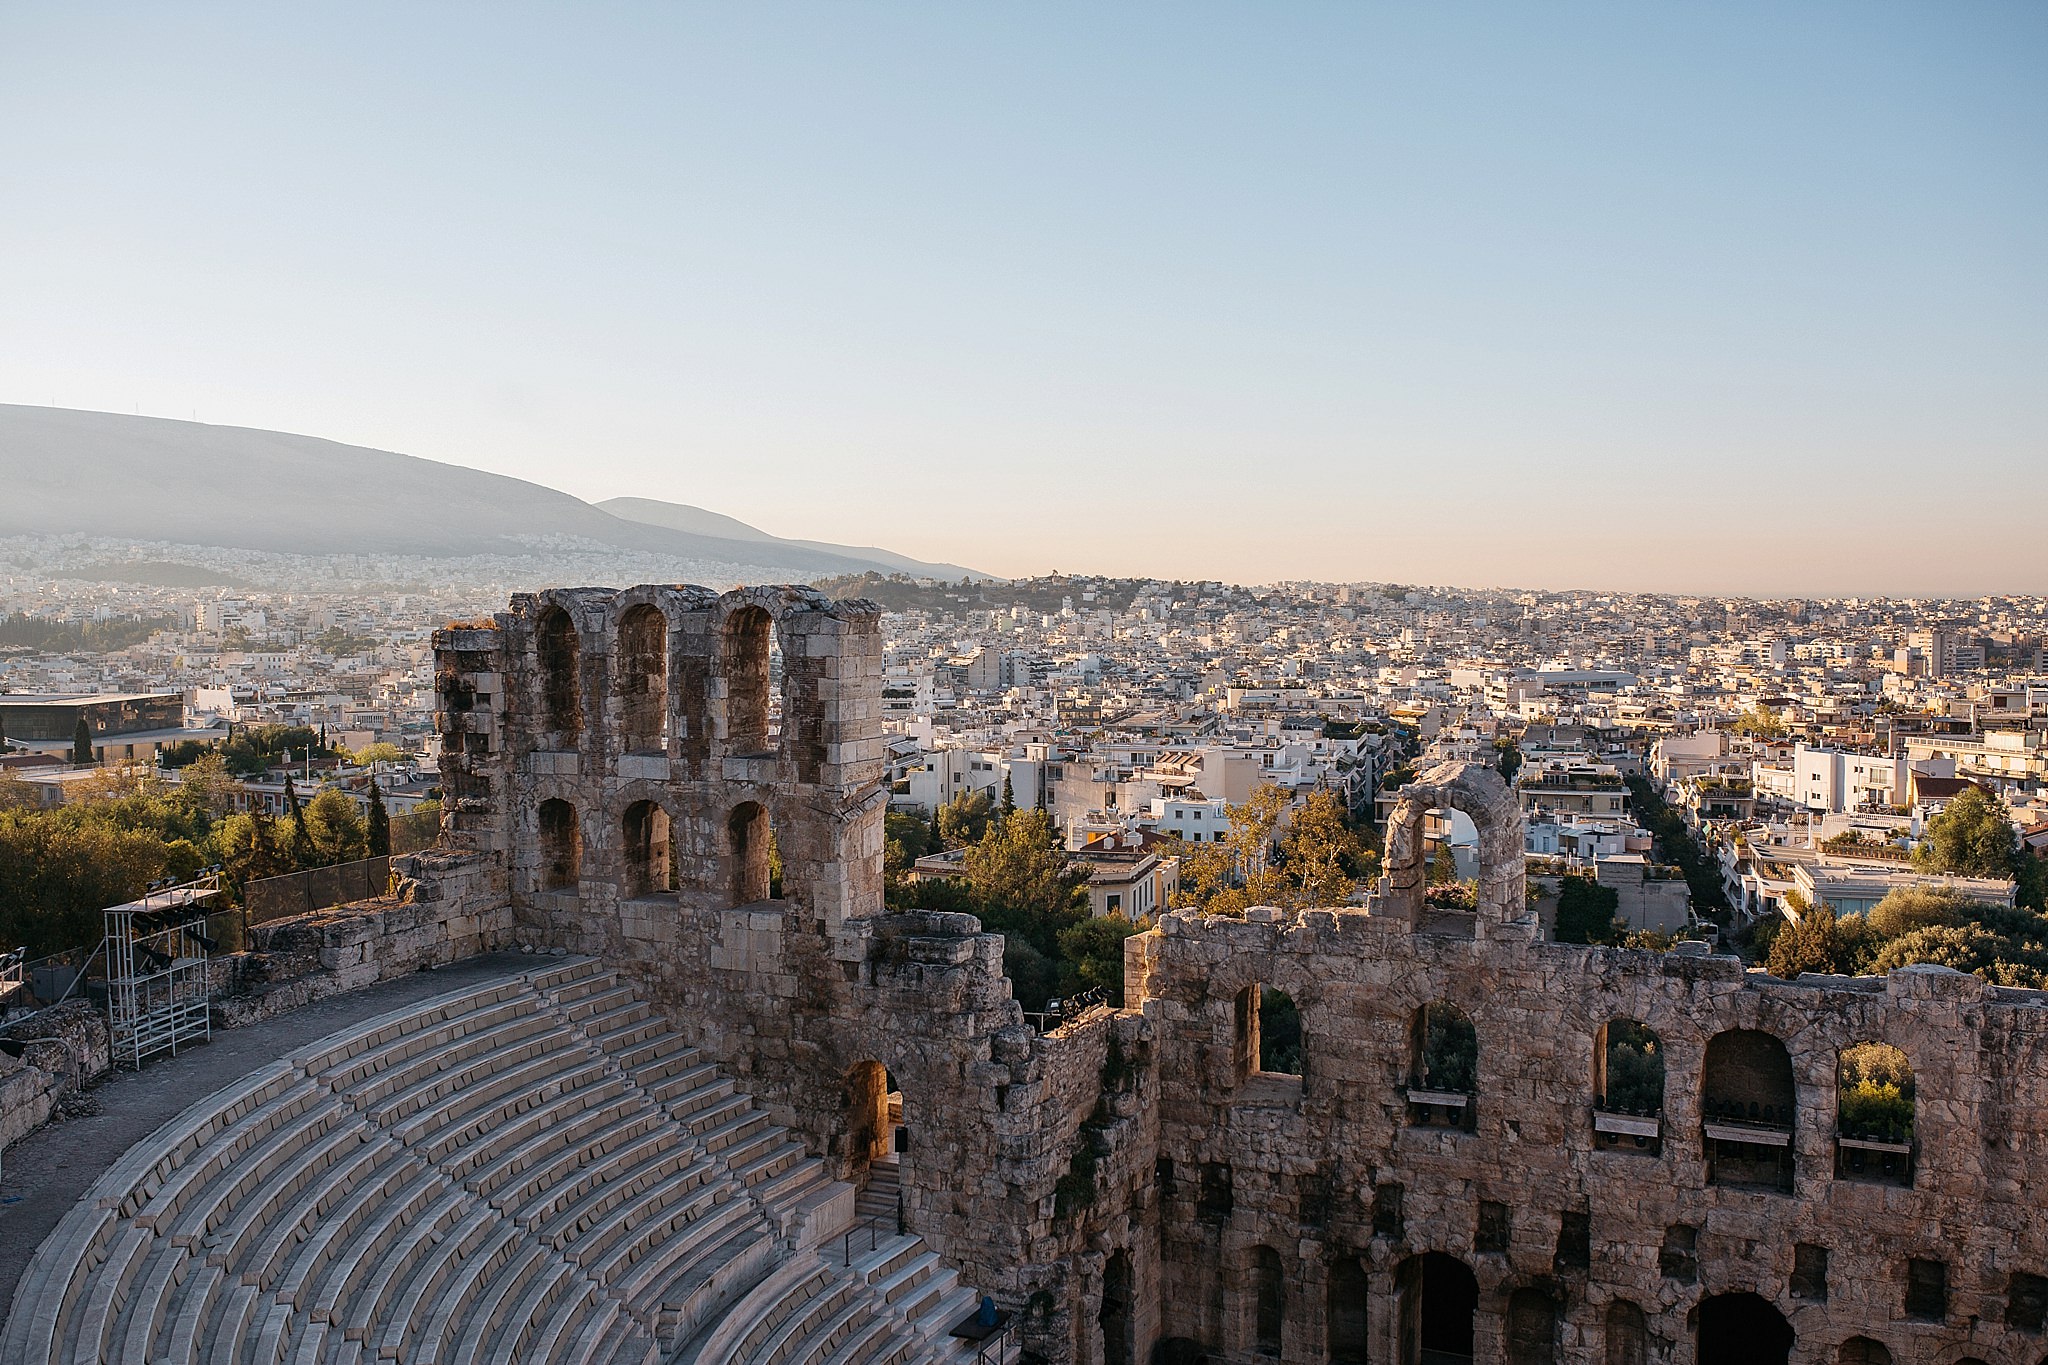   The Odeon of Herodes Atticus is a stone theatre that still gets used today  